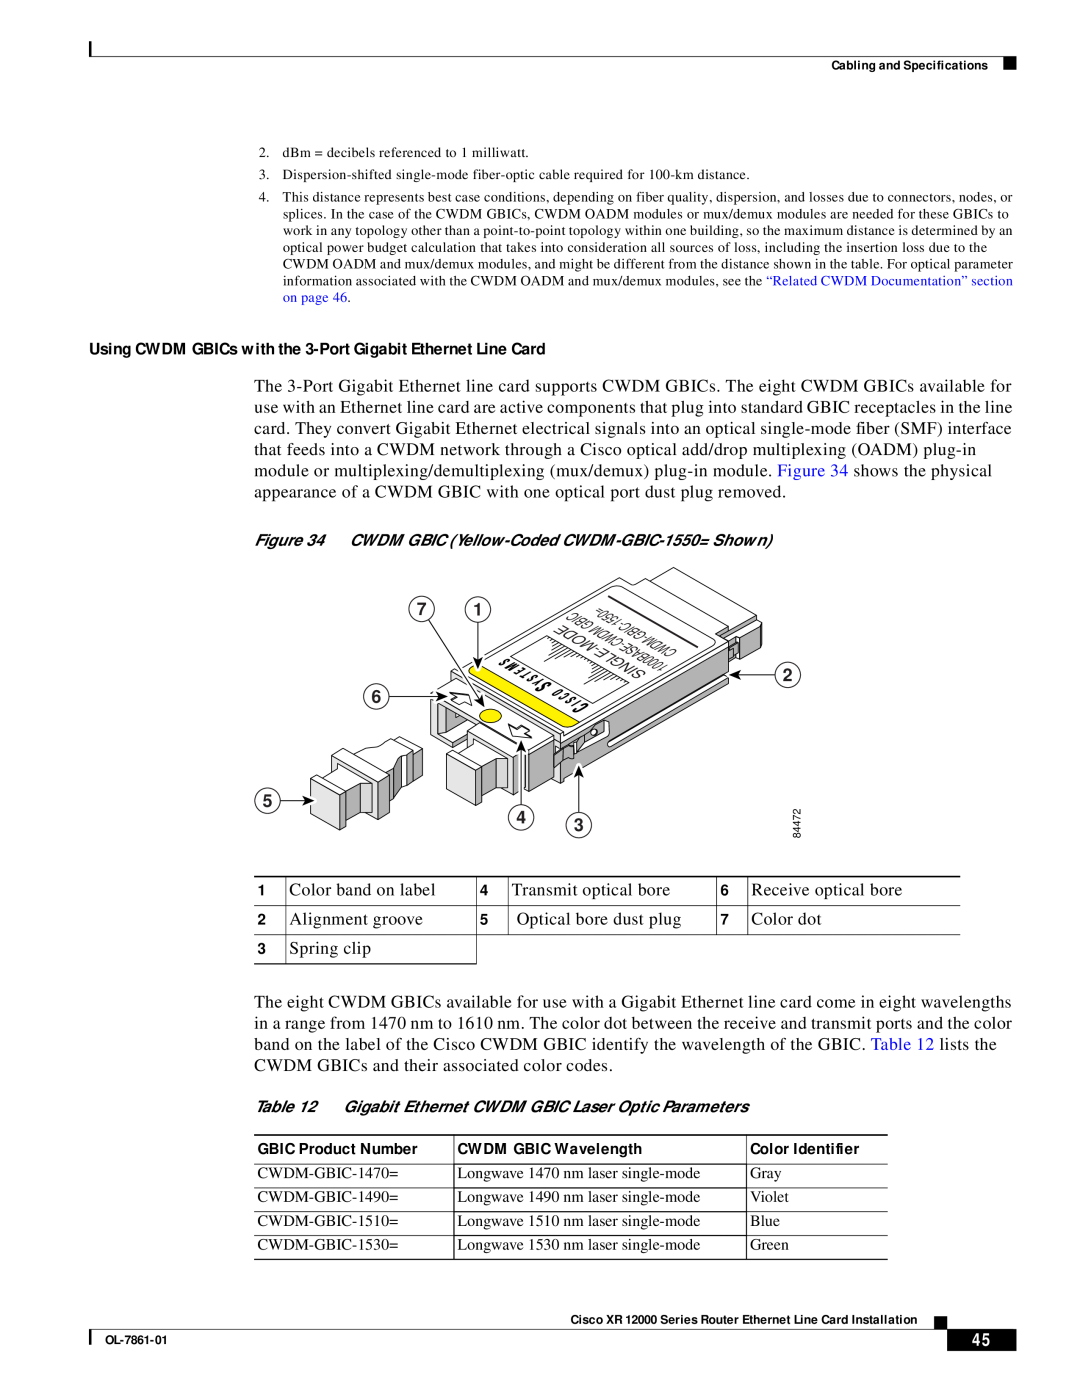 Cisco Systems OL-7861-01 manual Using CWDM GBICs with the 3-Port Gigabit Ethernet Line Card, GBIC Product Number 